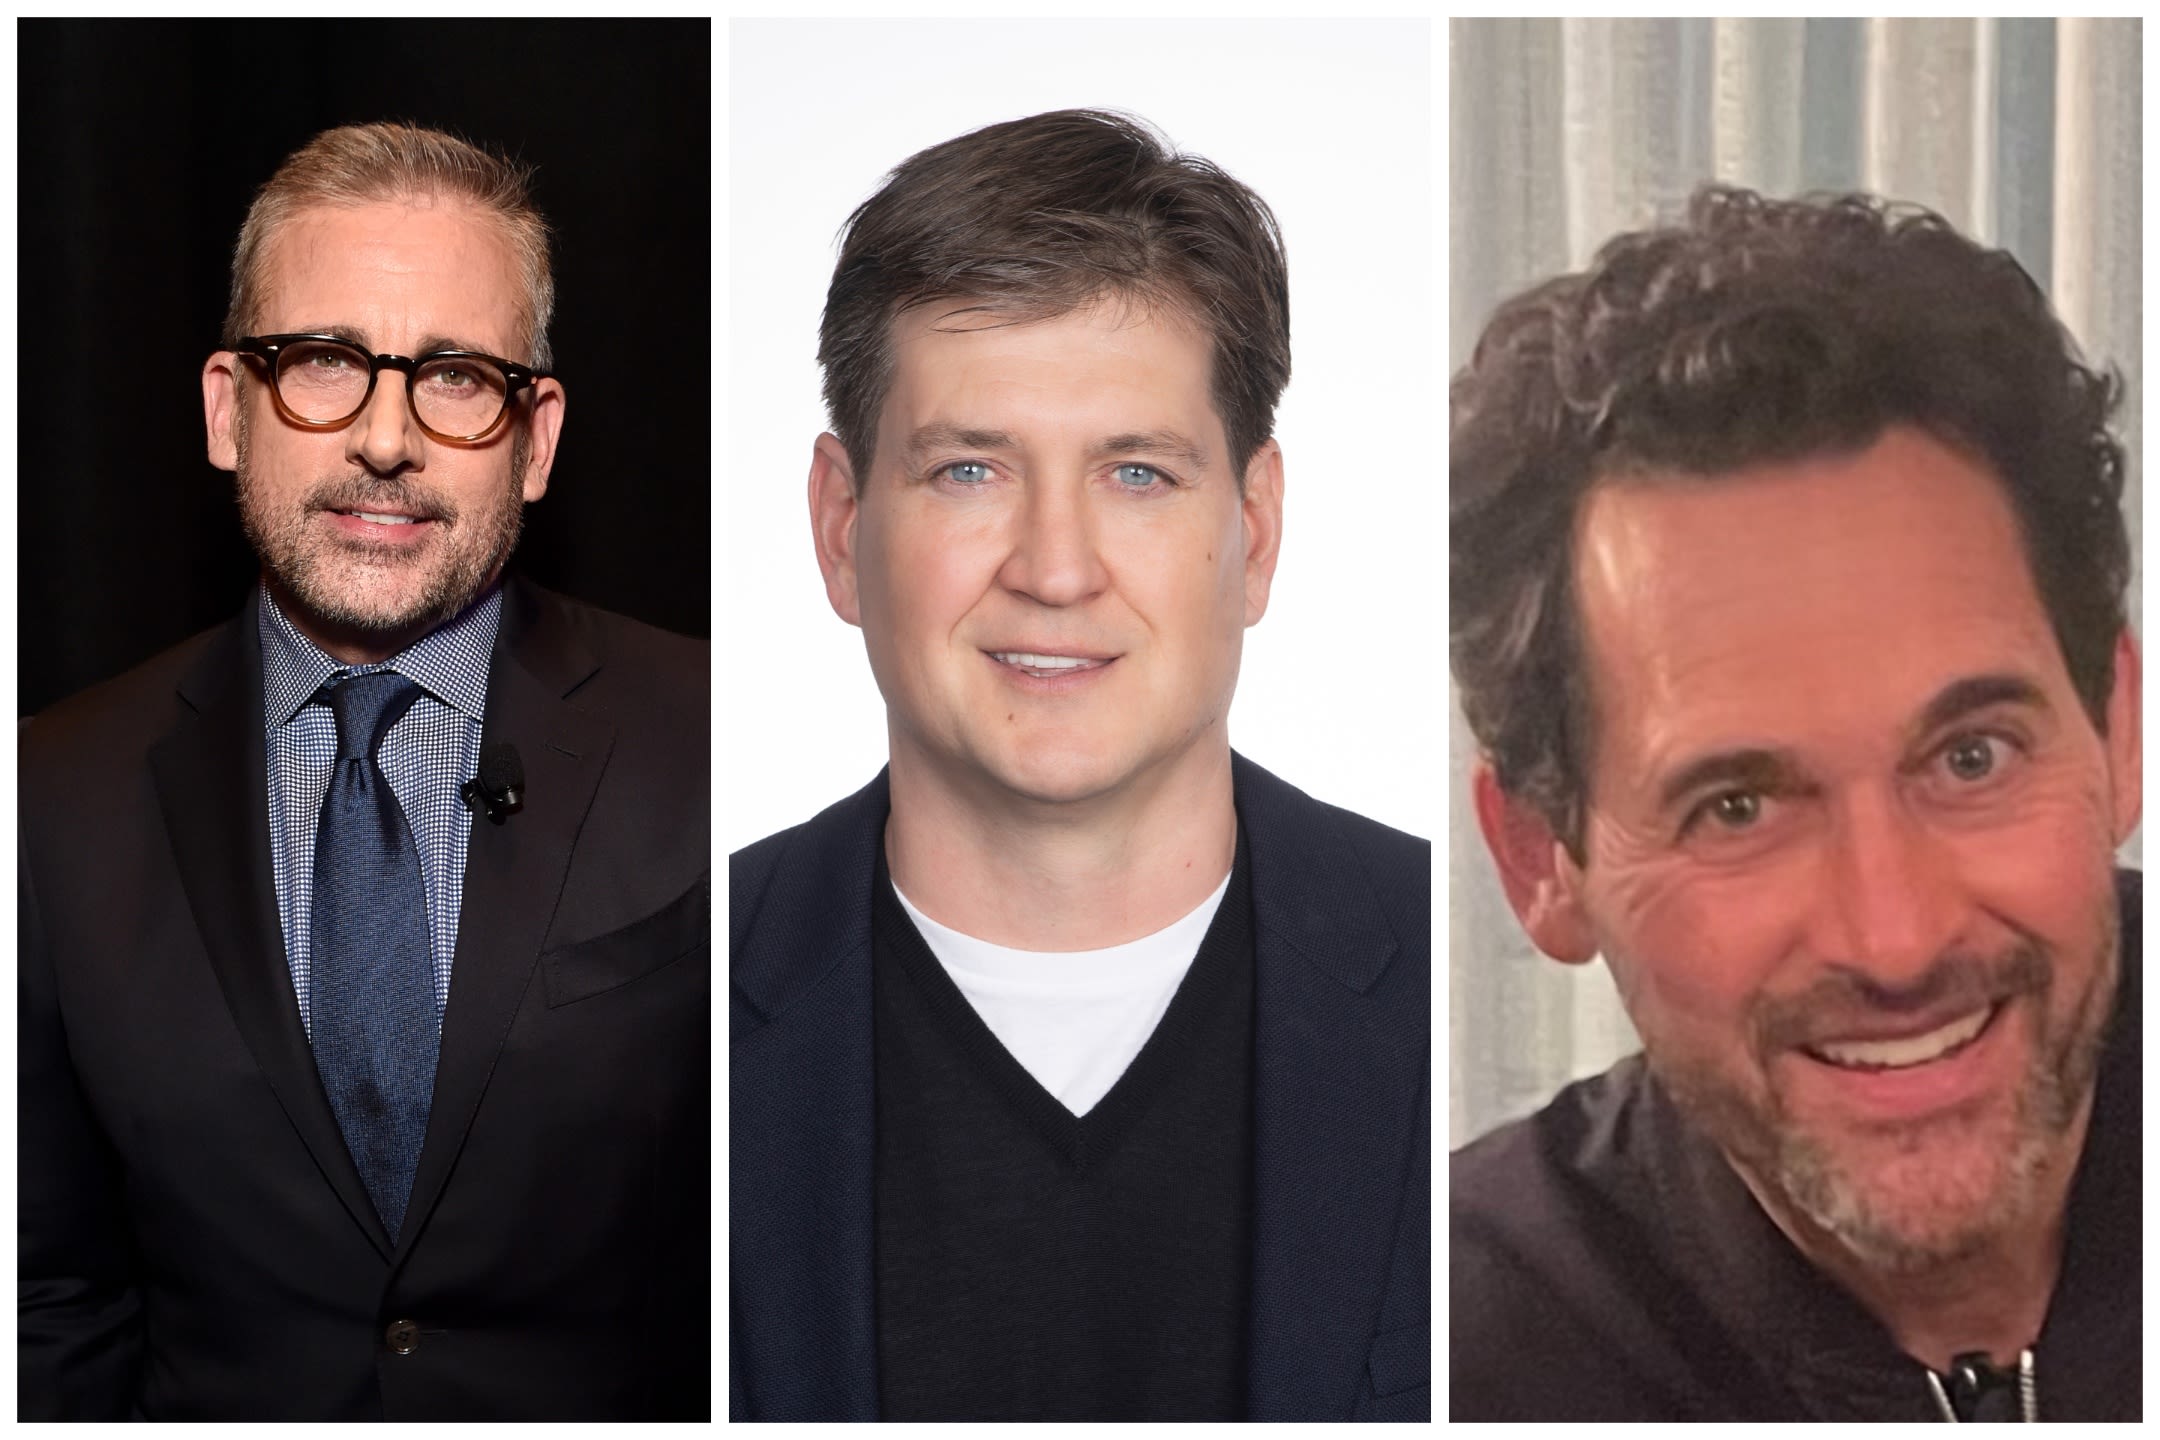 Steve Carell to Star in HBO Comedy Series From Bill Lawrence, Matt Tarses